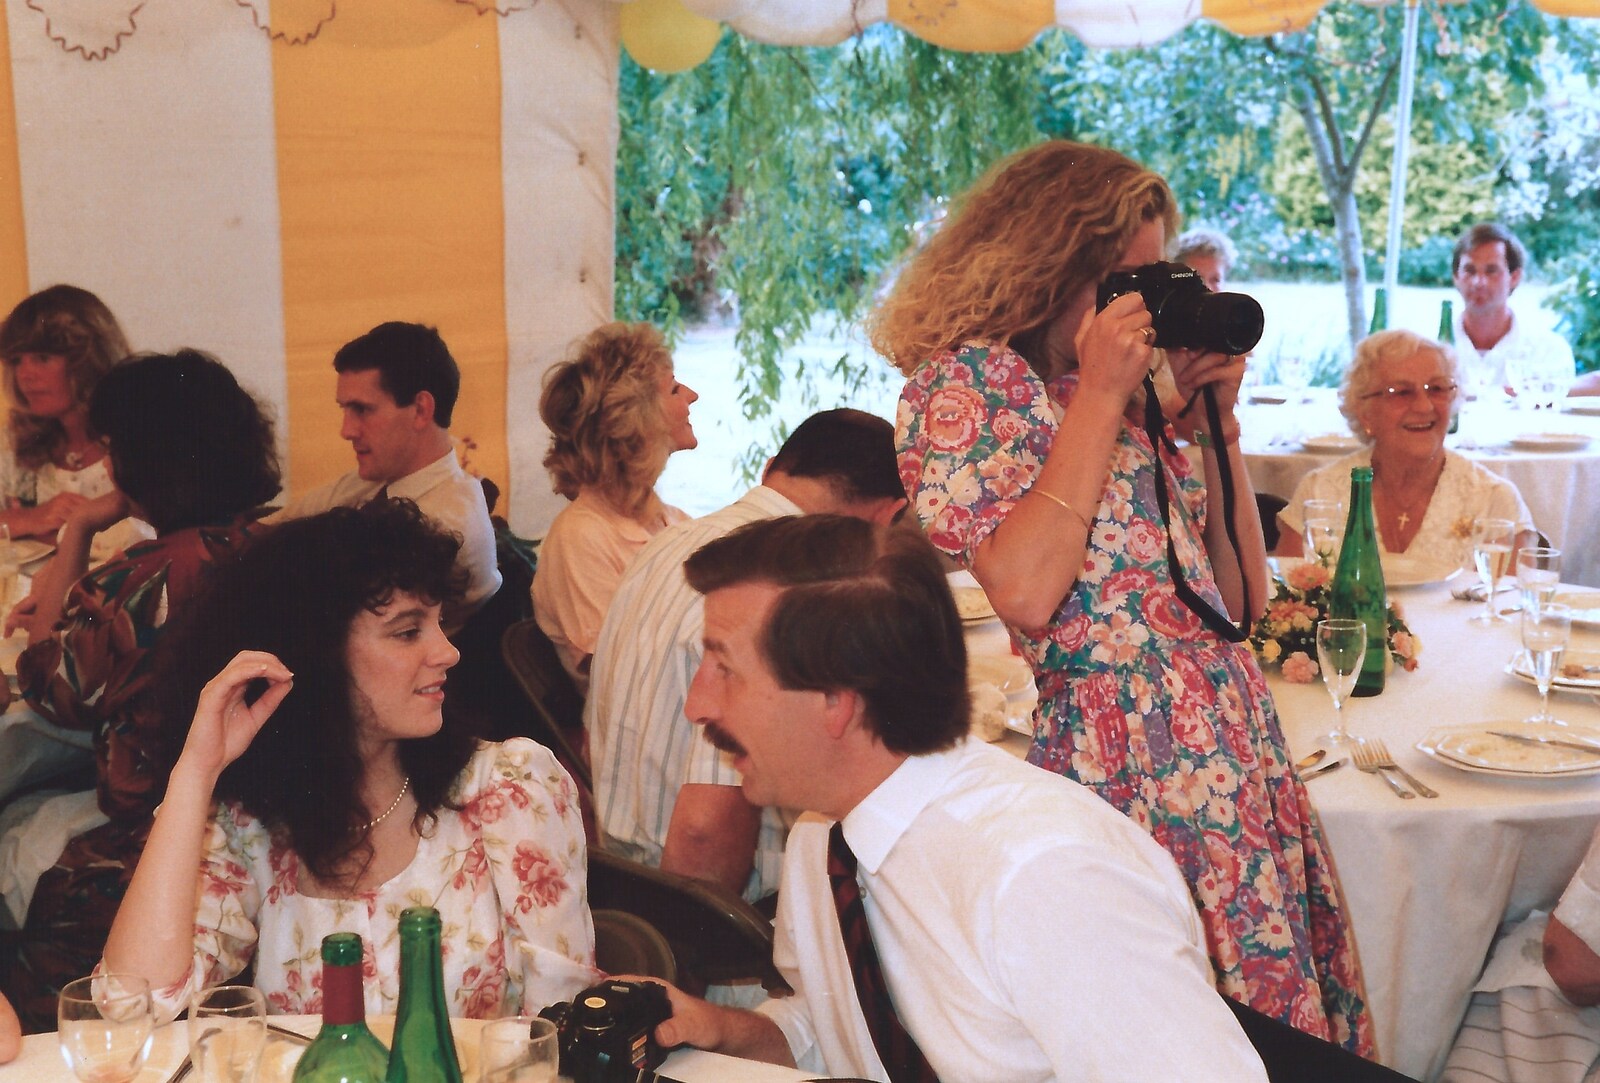 Kim takes a photo from Mother and Mike's Wedding Reception, Bransgore, Dorset - 20th August 1988